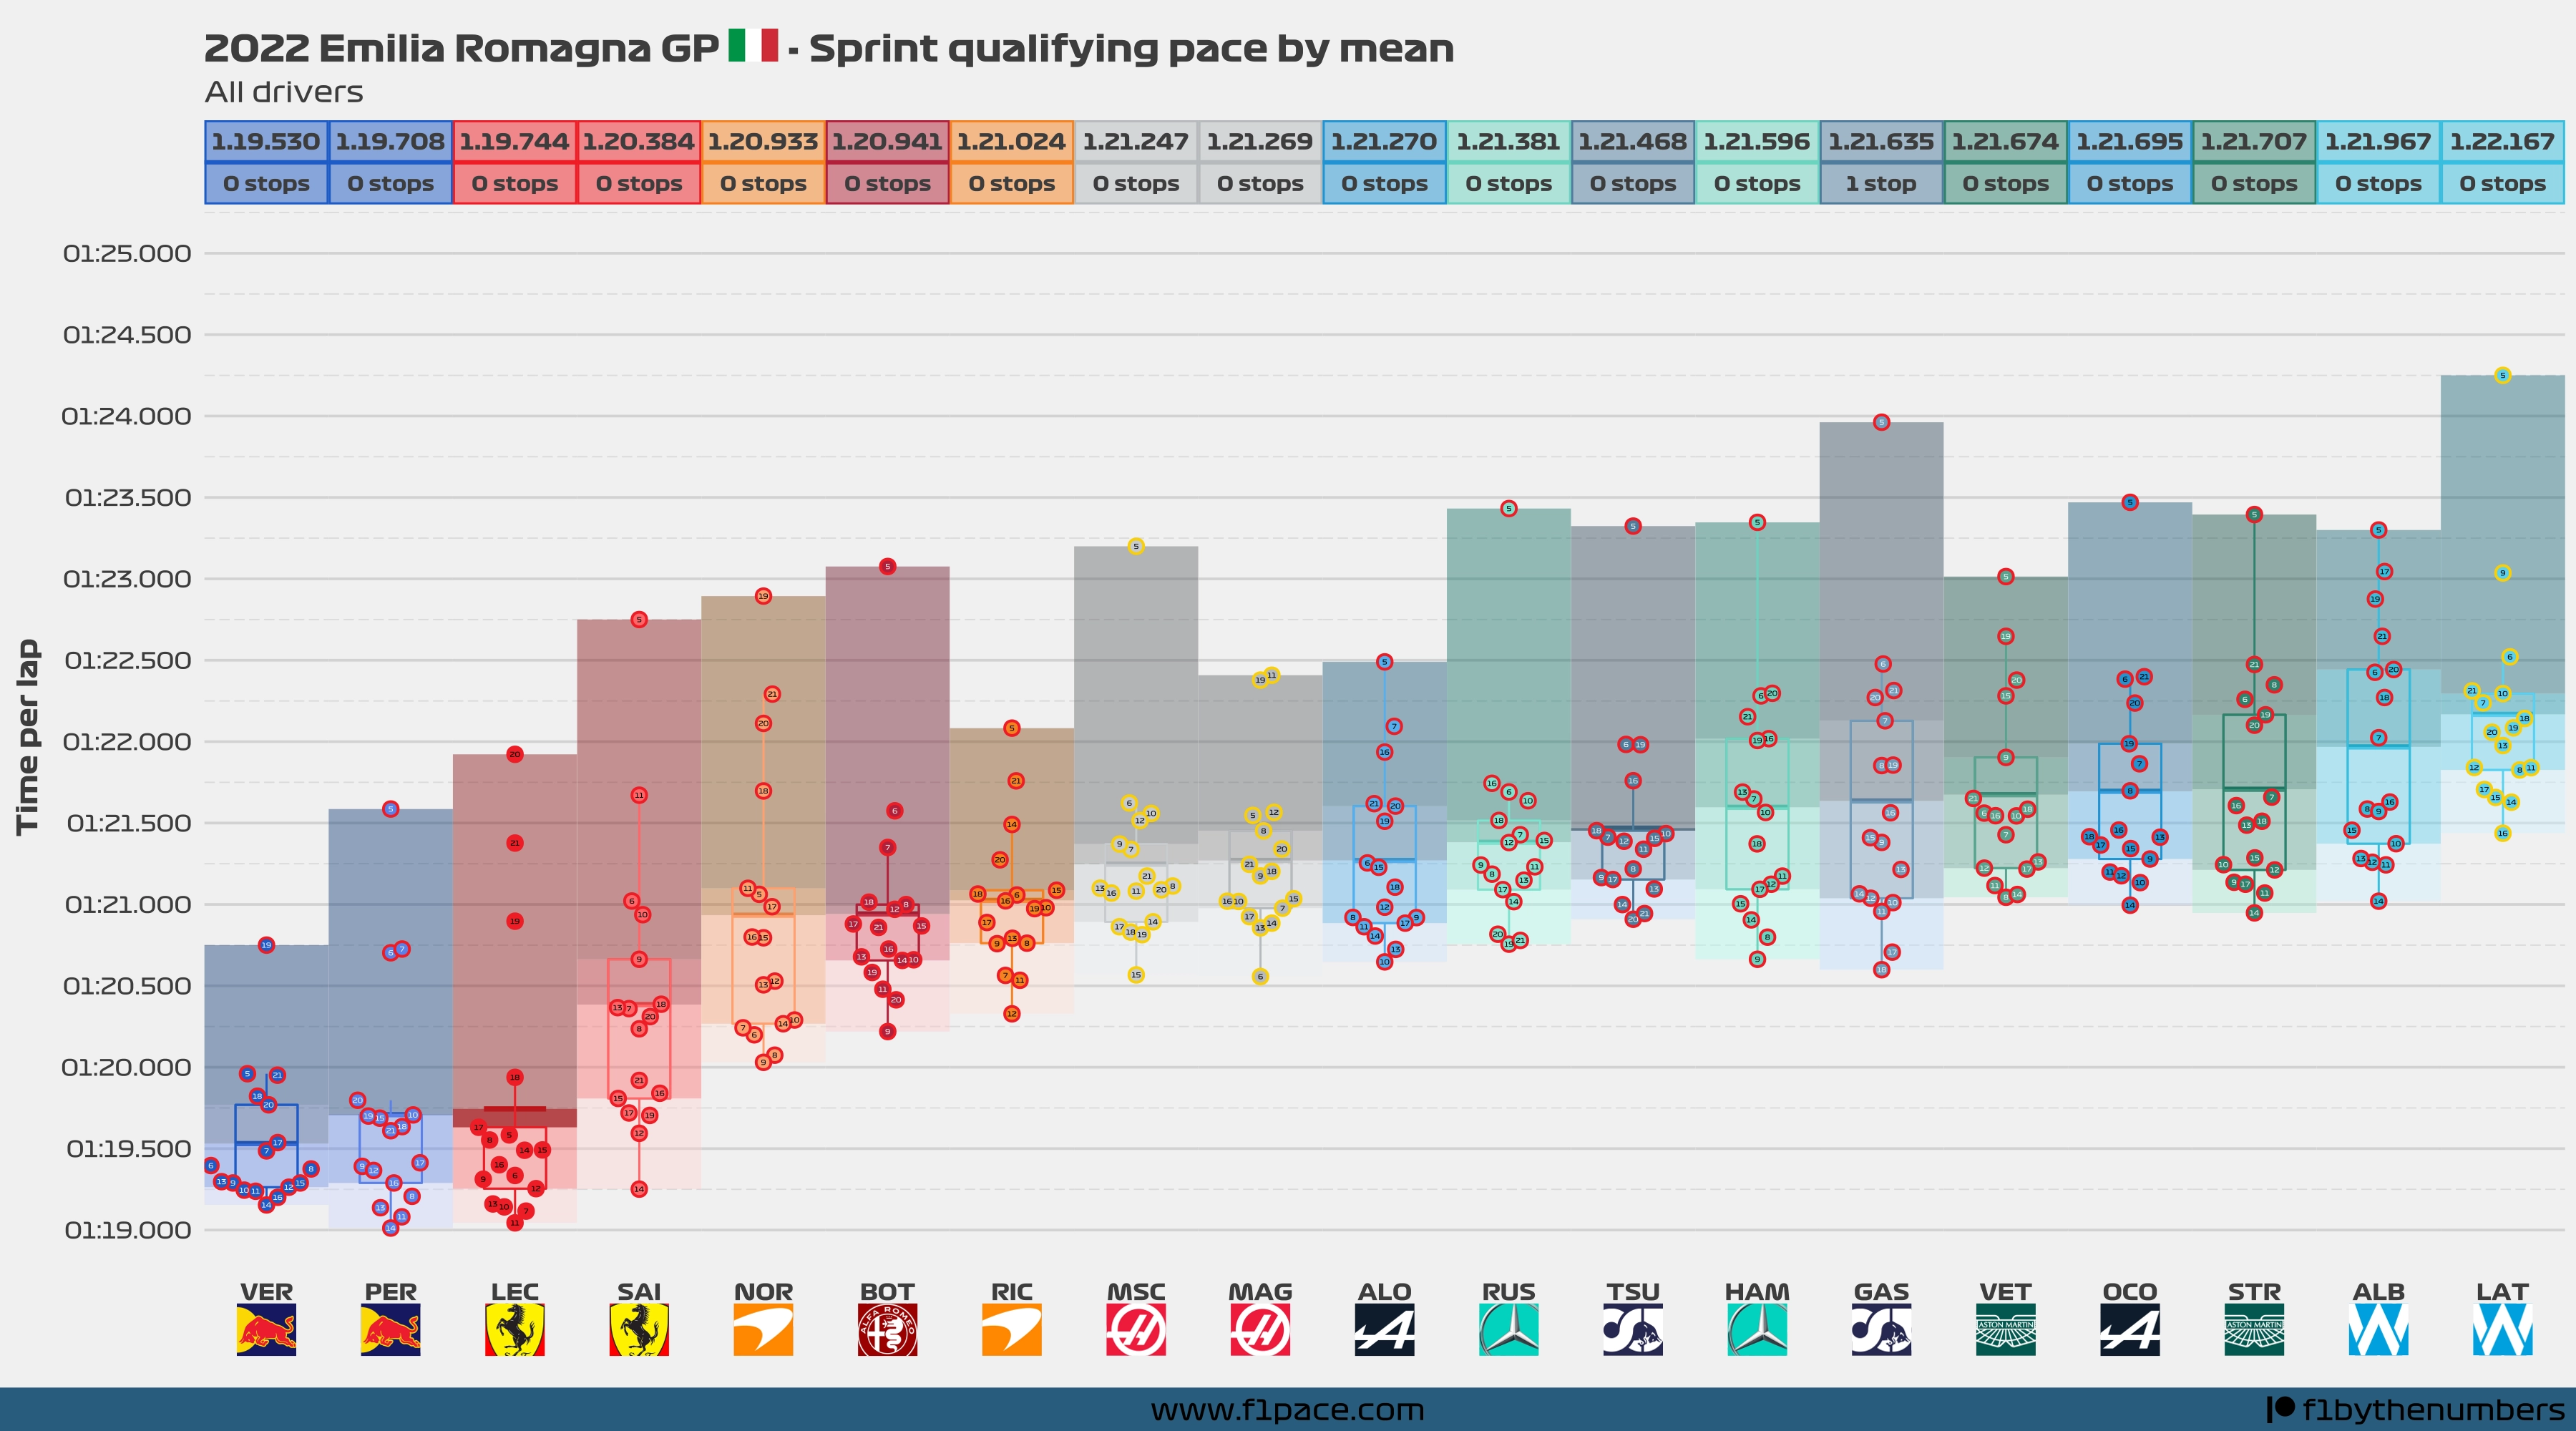 Race pace: All drivers